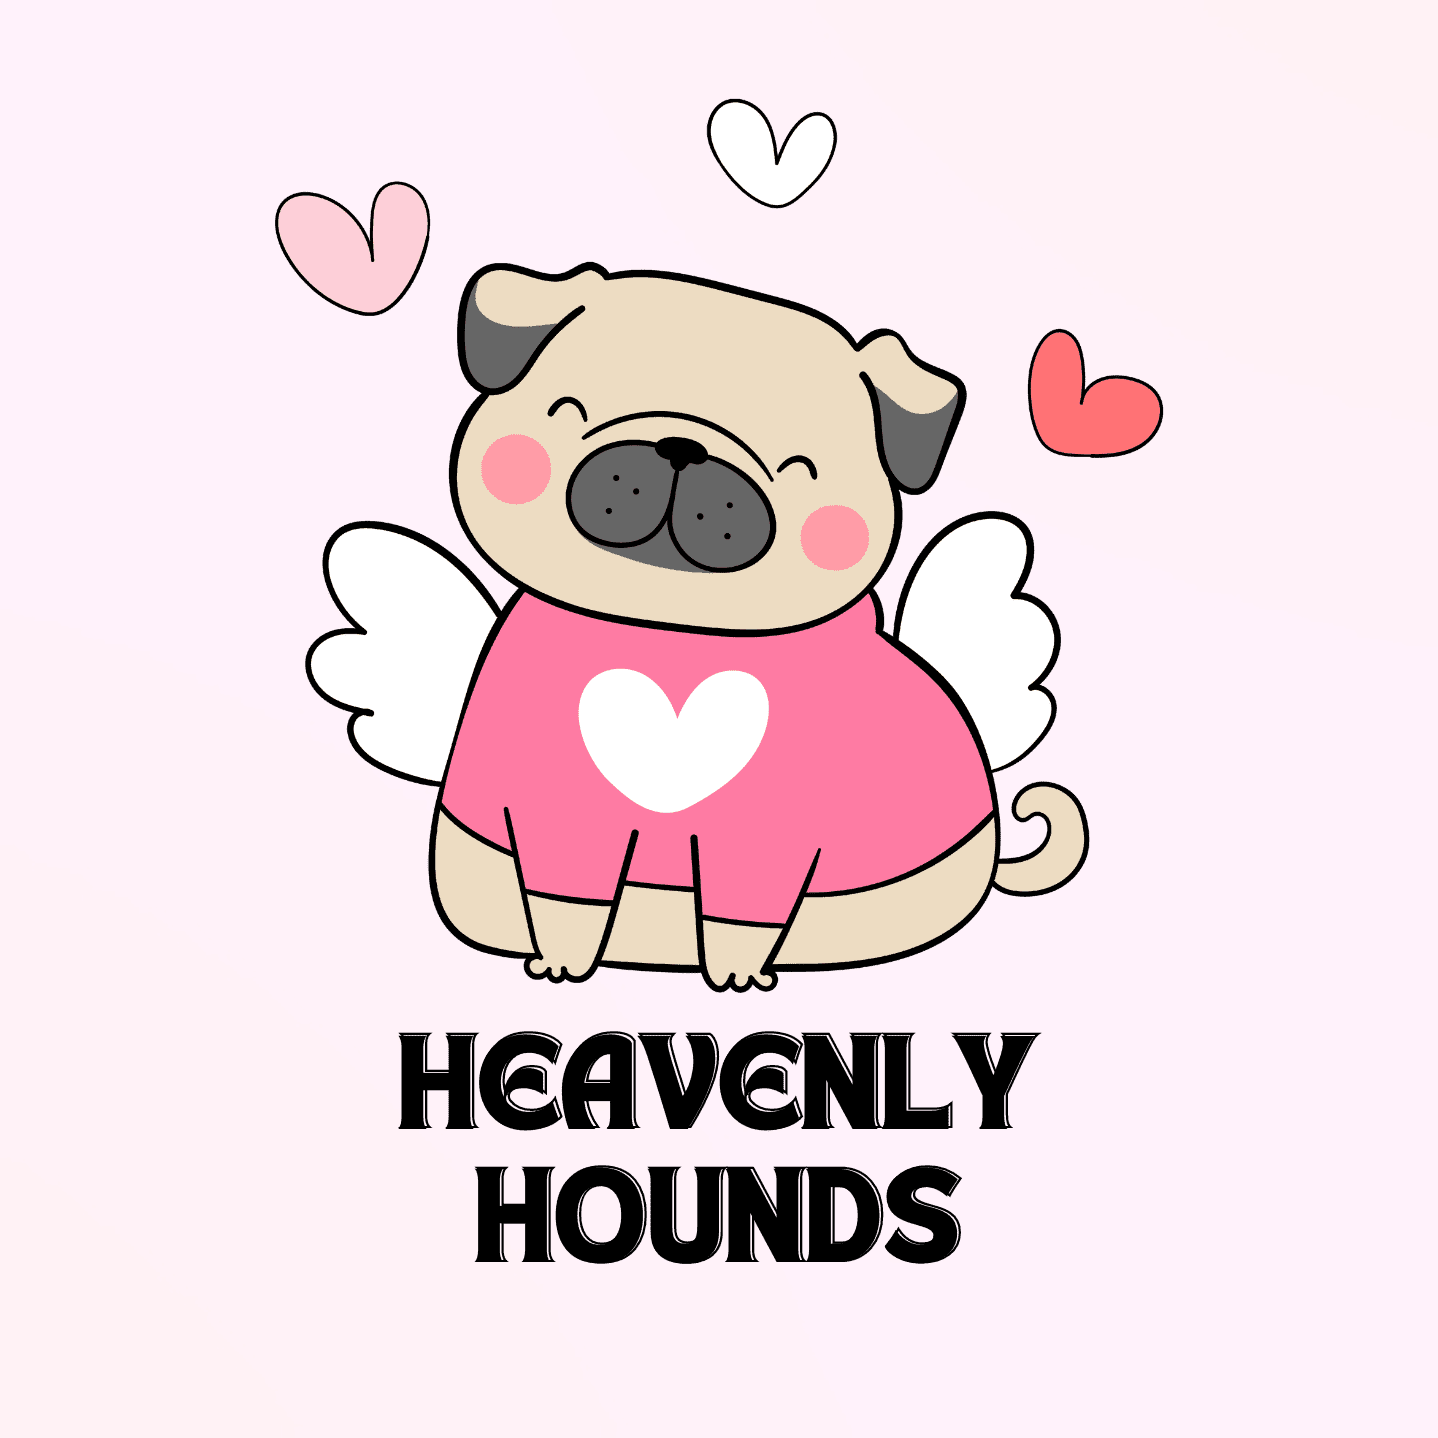 Heavenly Hounds